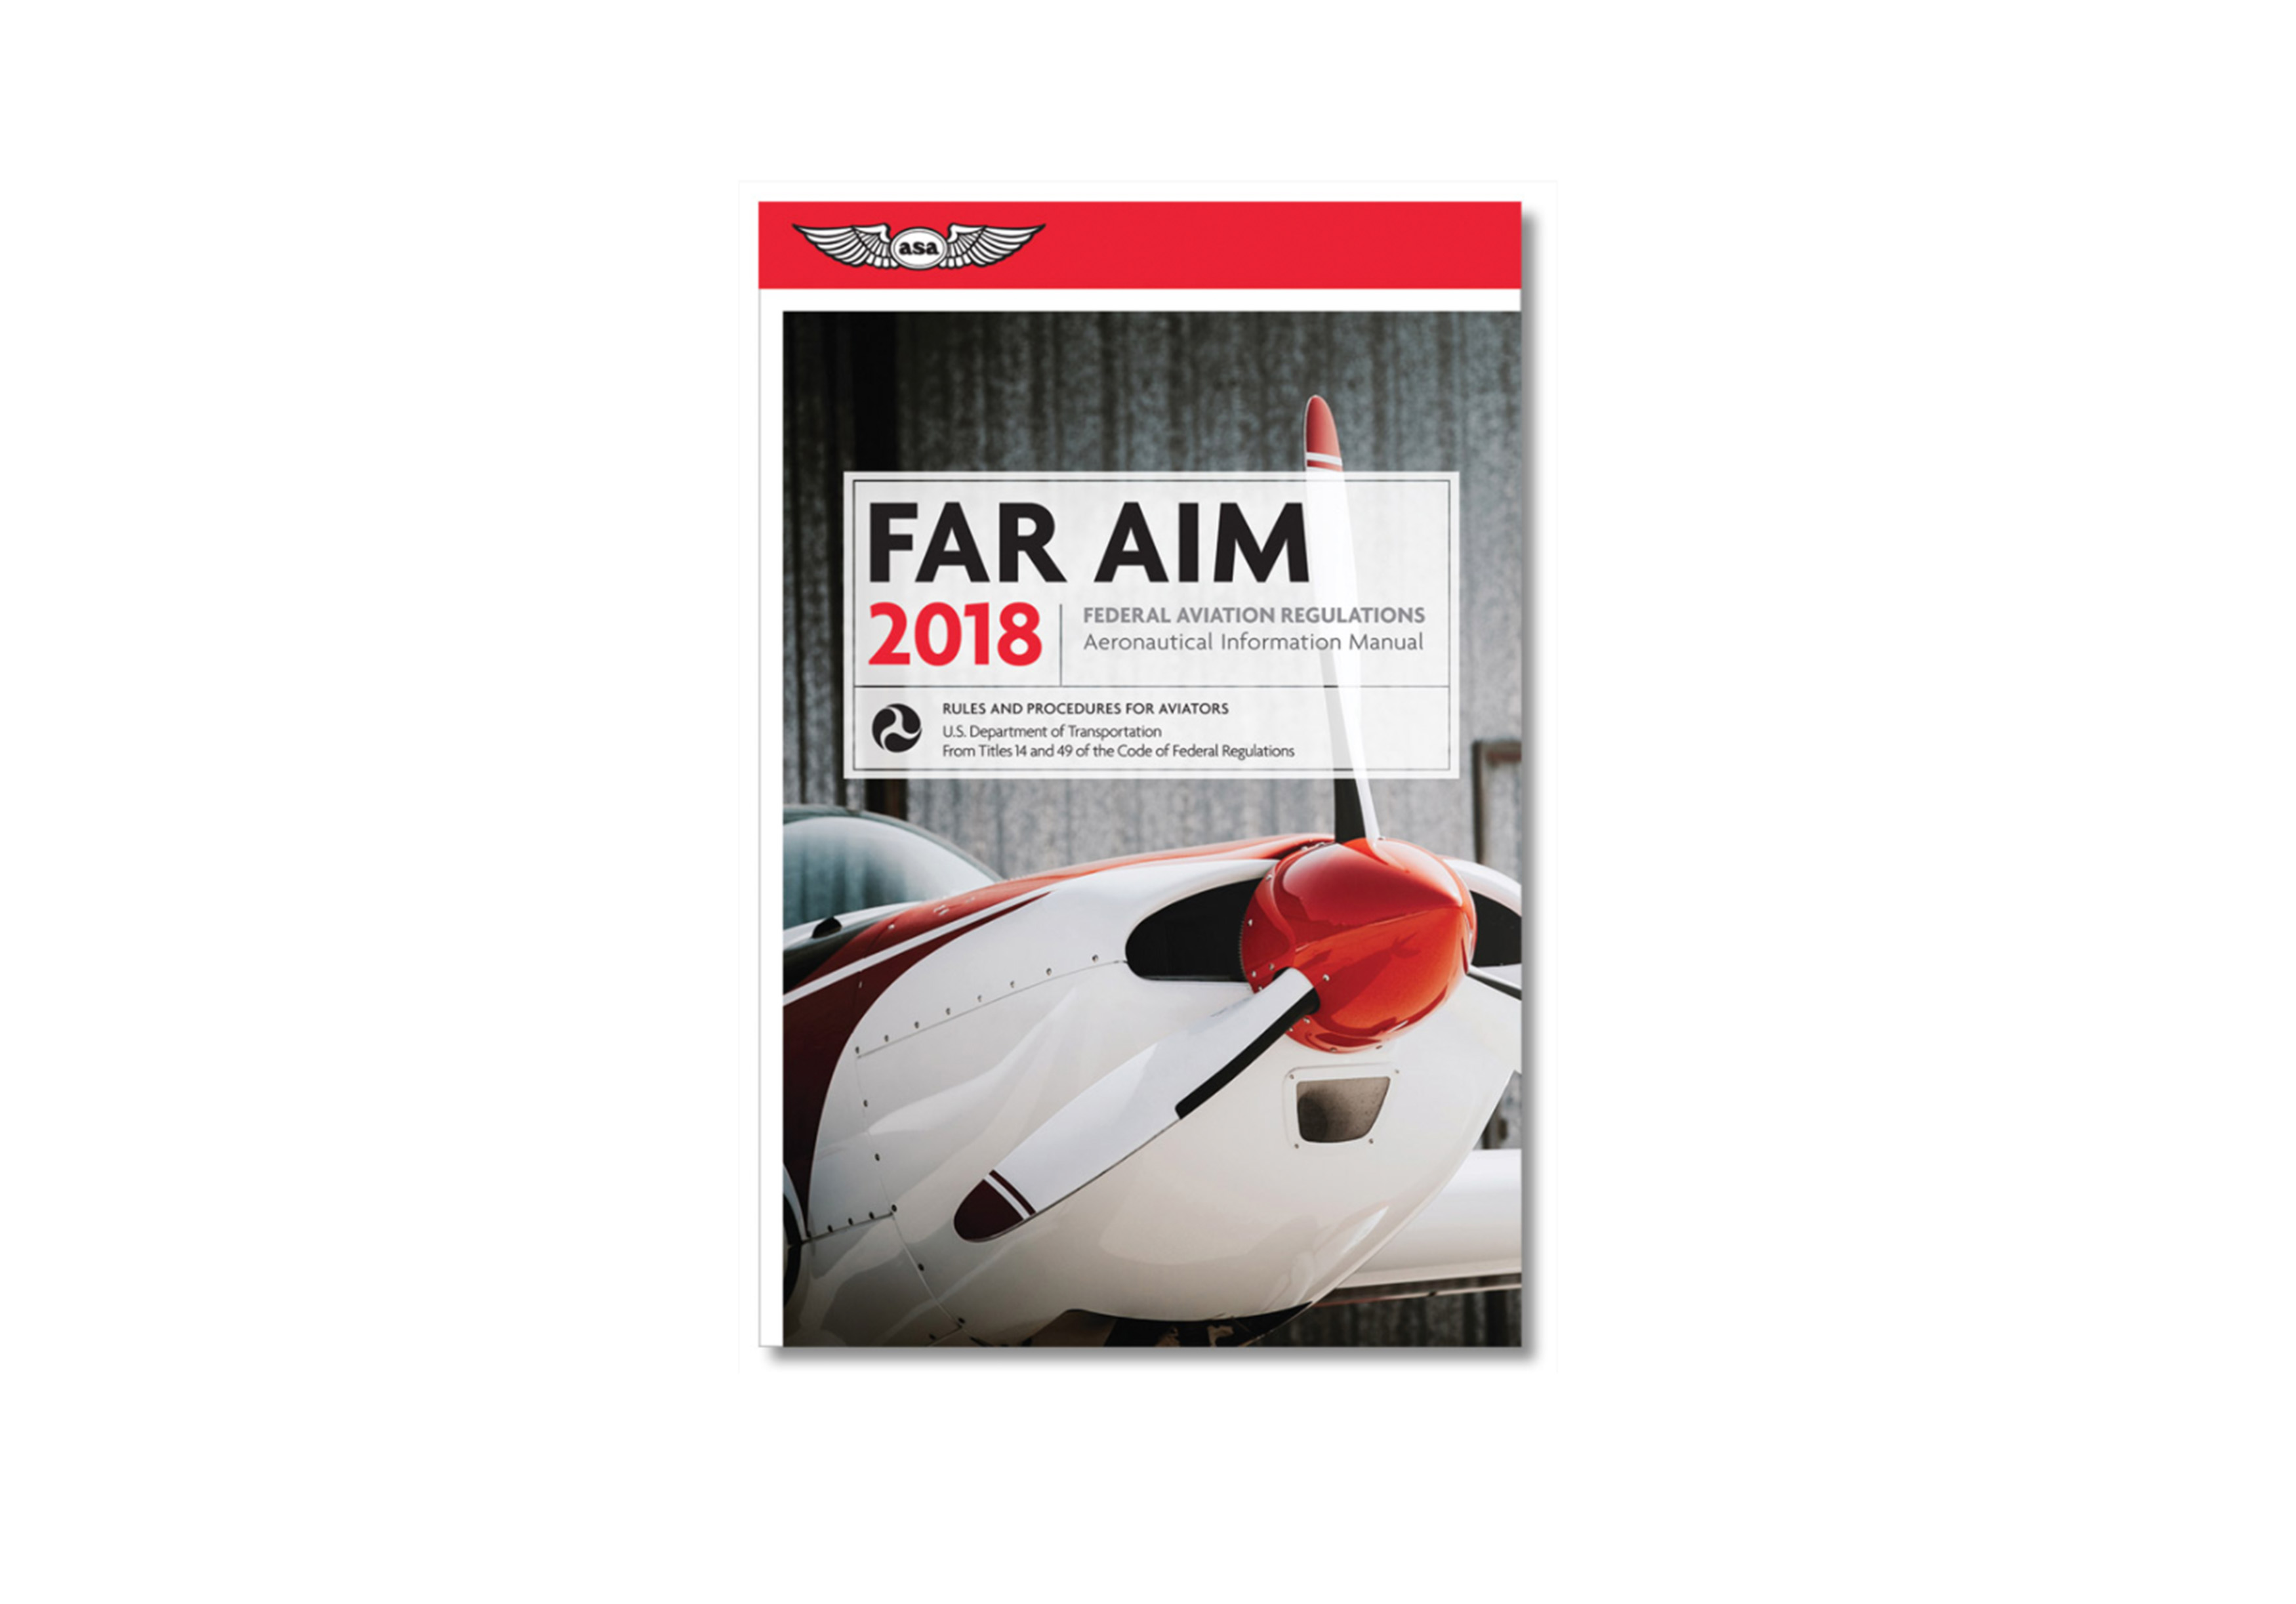 The 2018 FAR AIM Series publication is on its way to pilots, flight schools, and aviation supply companies, according to Aviation Supplies & Academics. Photo courtesy of ASA.